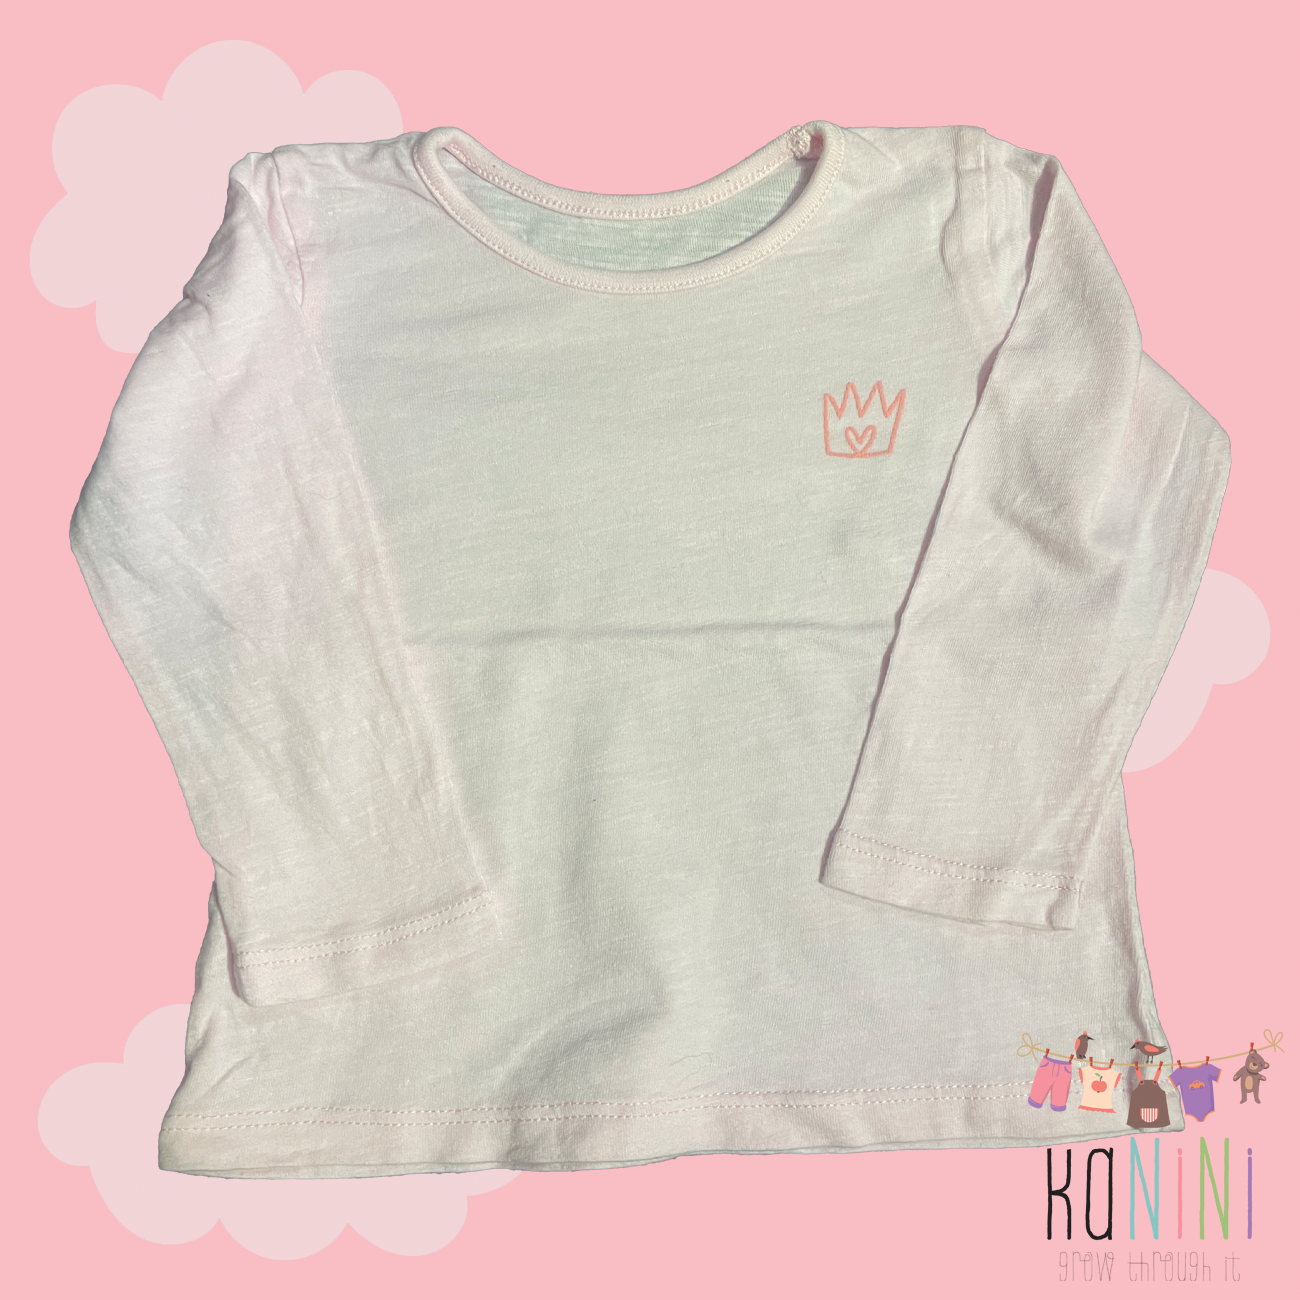 Featured image for “Woolworths 6 - 12 Months Girls Long Sleeve T-Shirt”